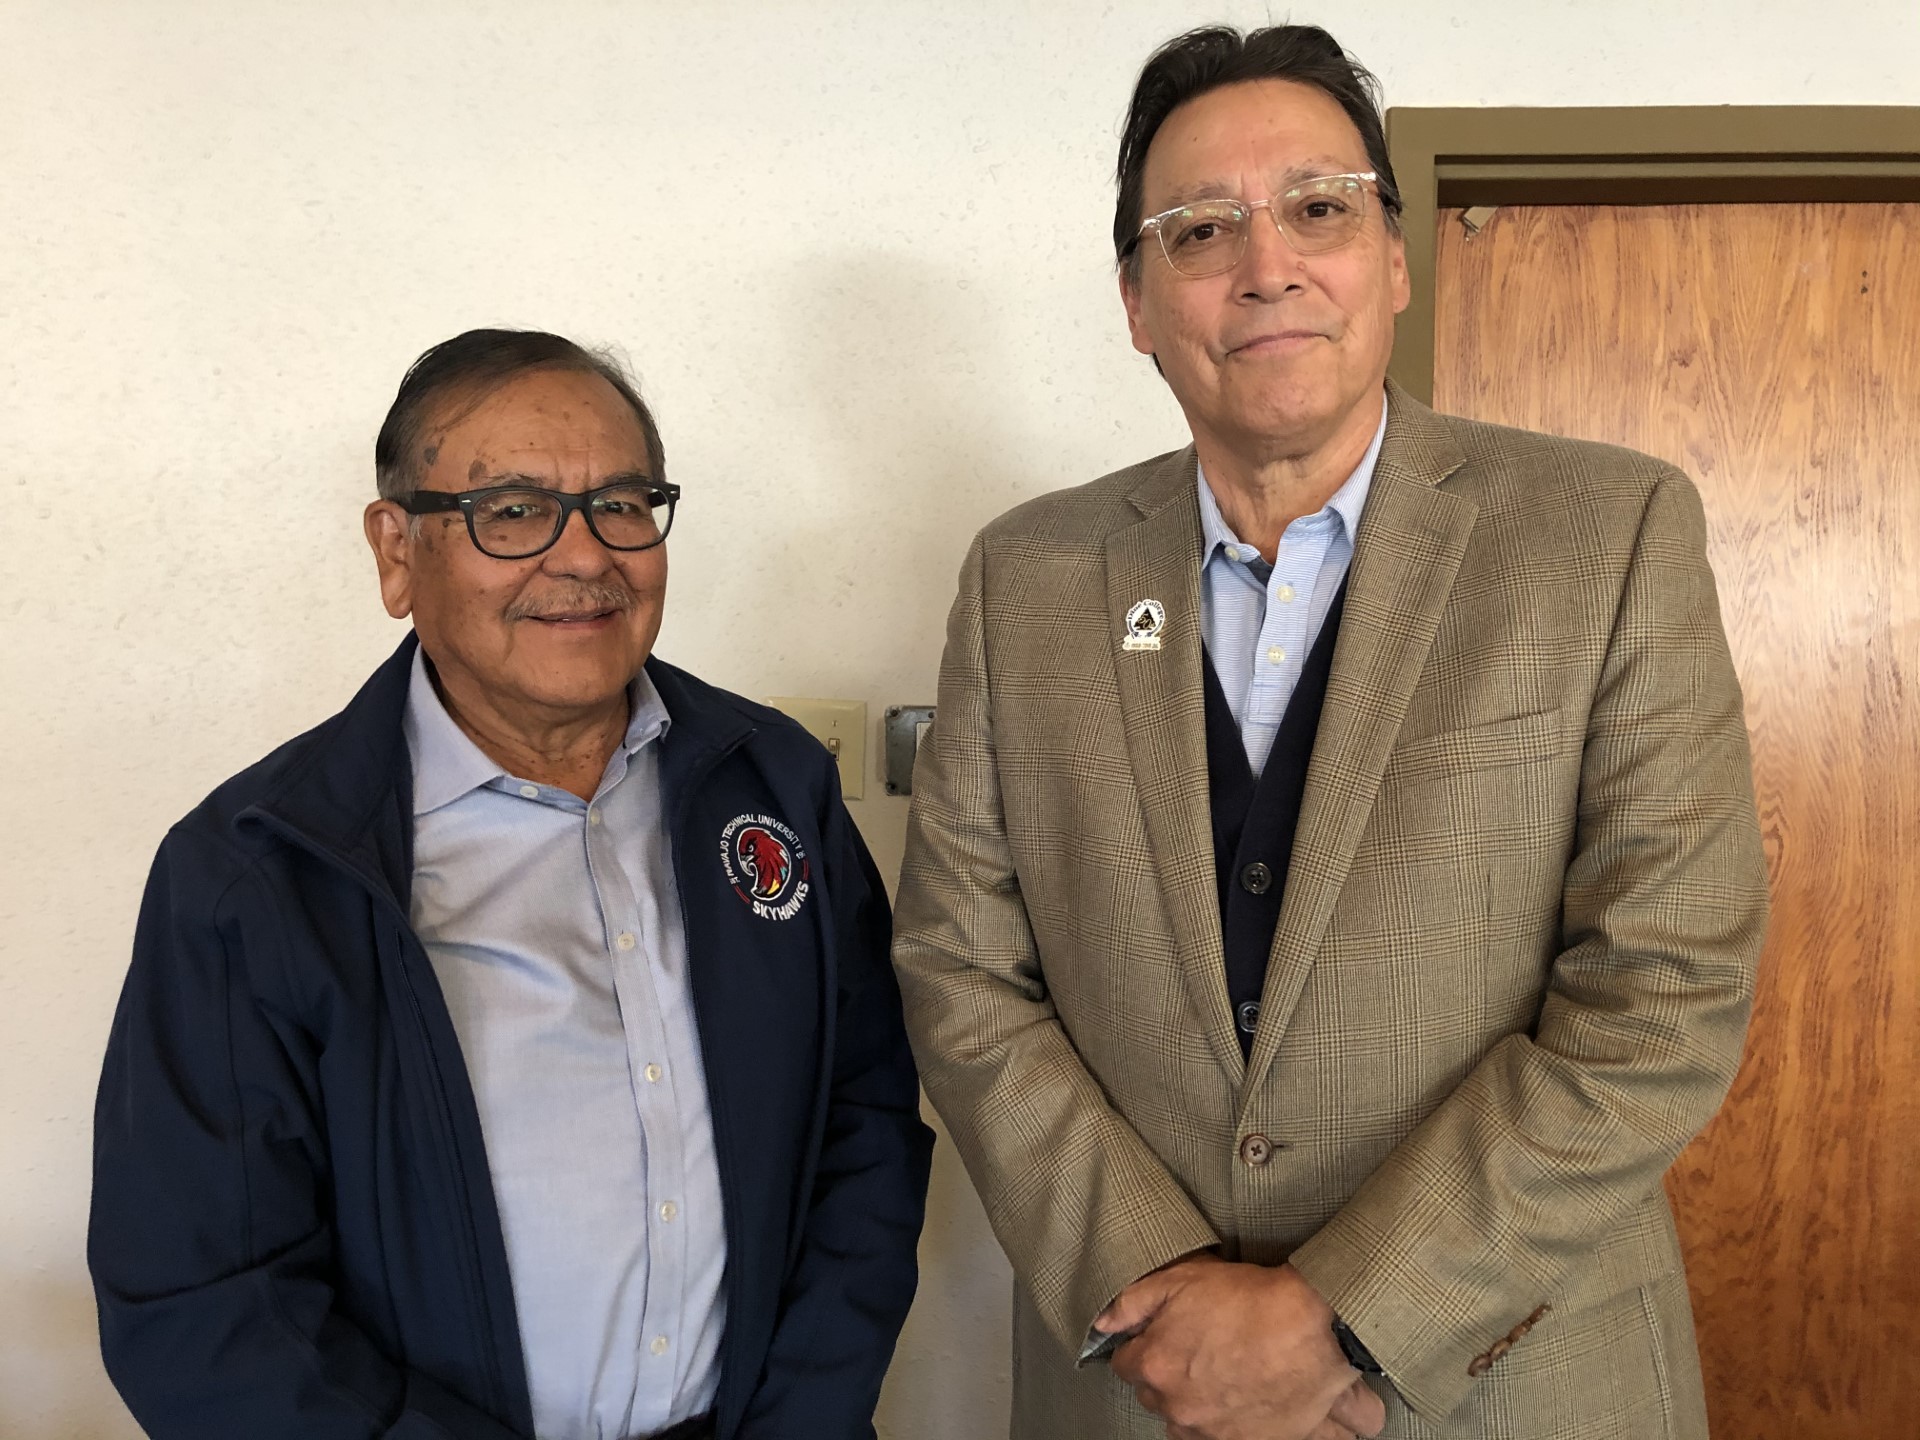 During lunch Barbara was also able to meet with the Presidents of Dine College (Dr. Charles Roessel) and Navajo Technical University (Dr. Elmer Guy). Dr. Guy’s wife, Martha Guy, recently received her EdD from Fielding.